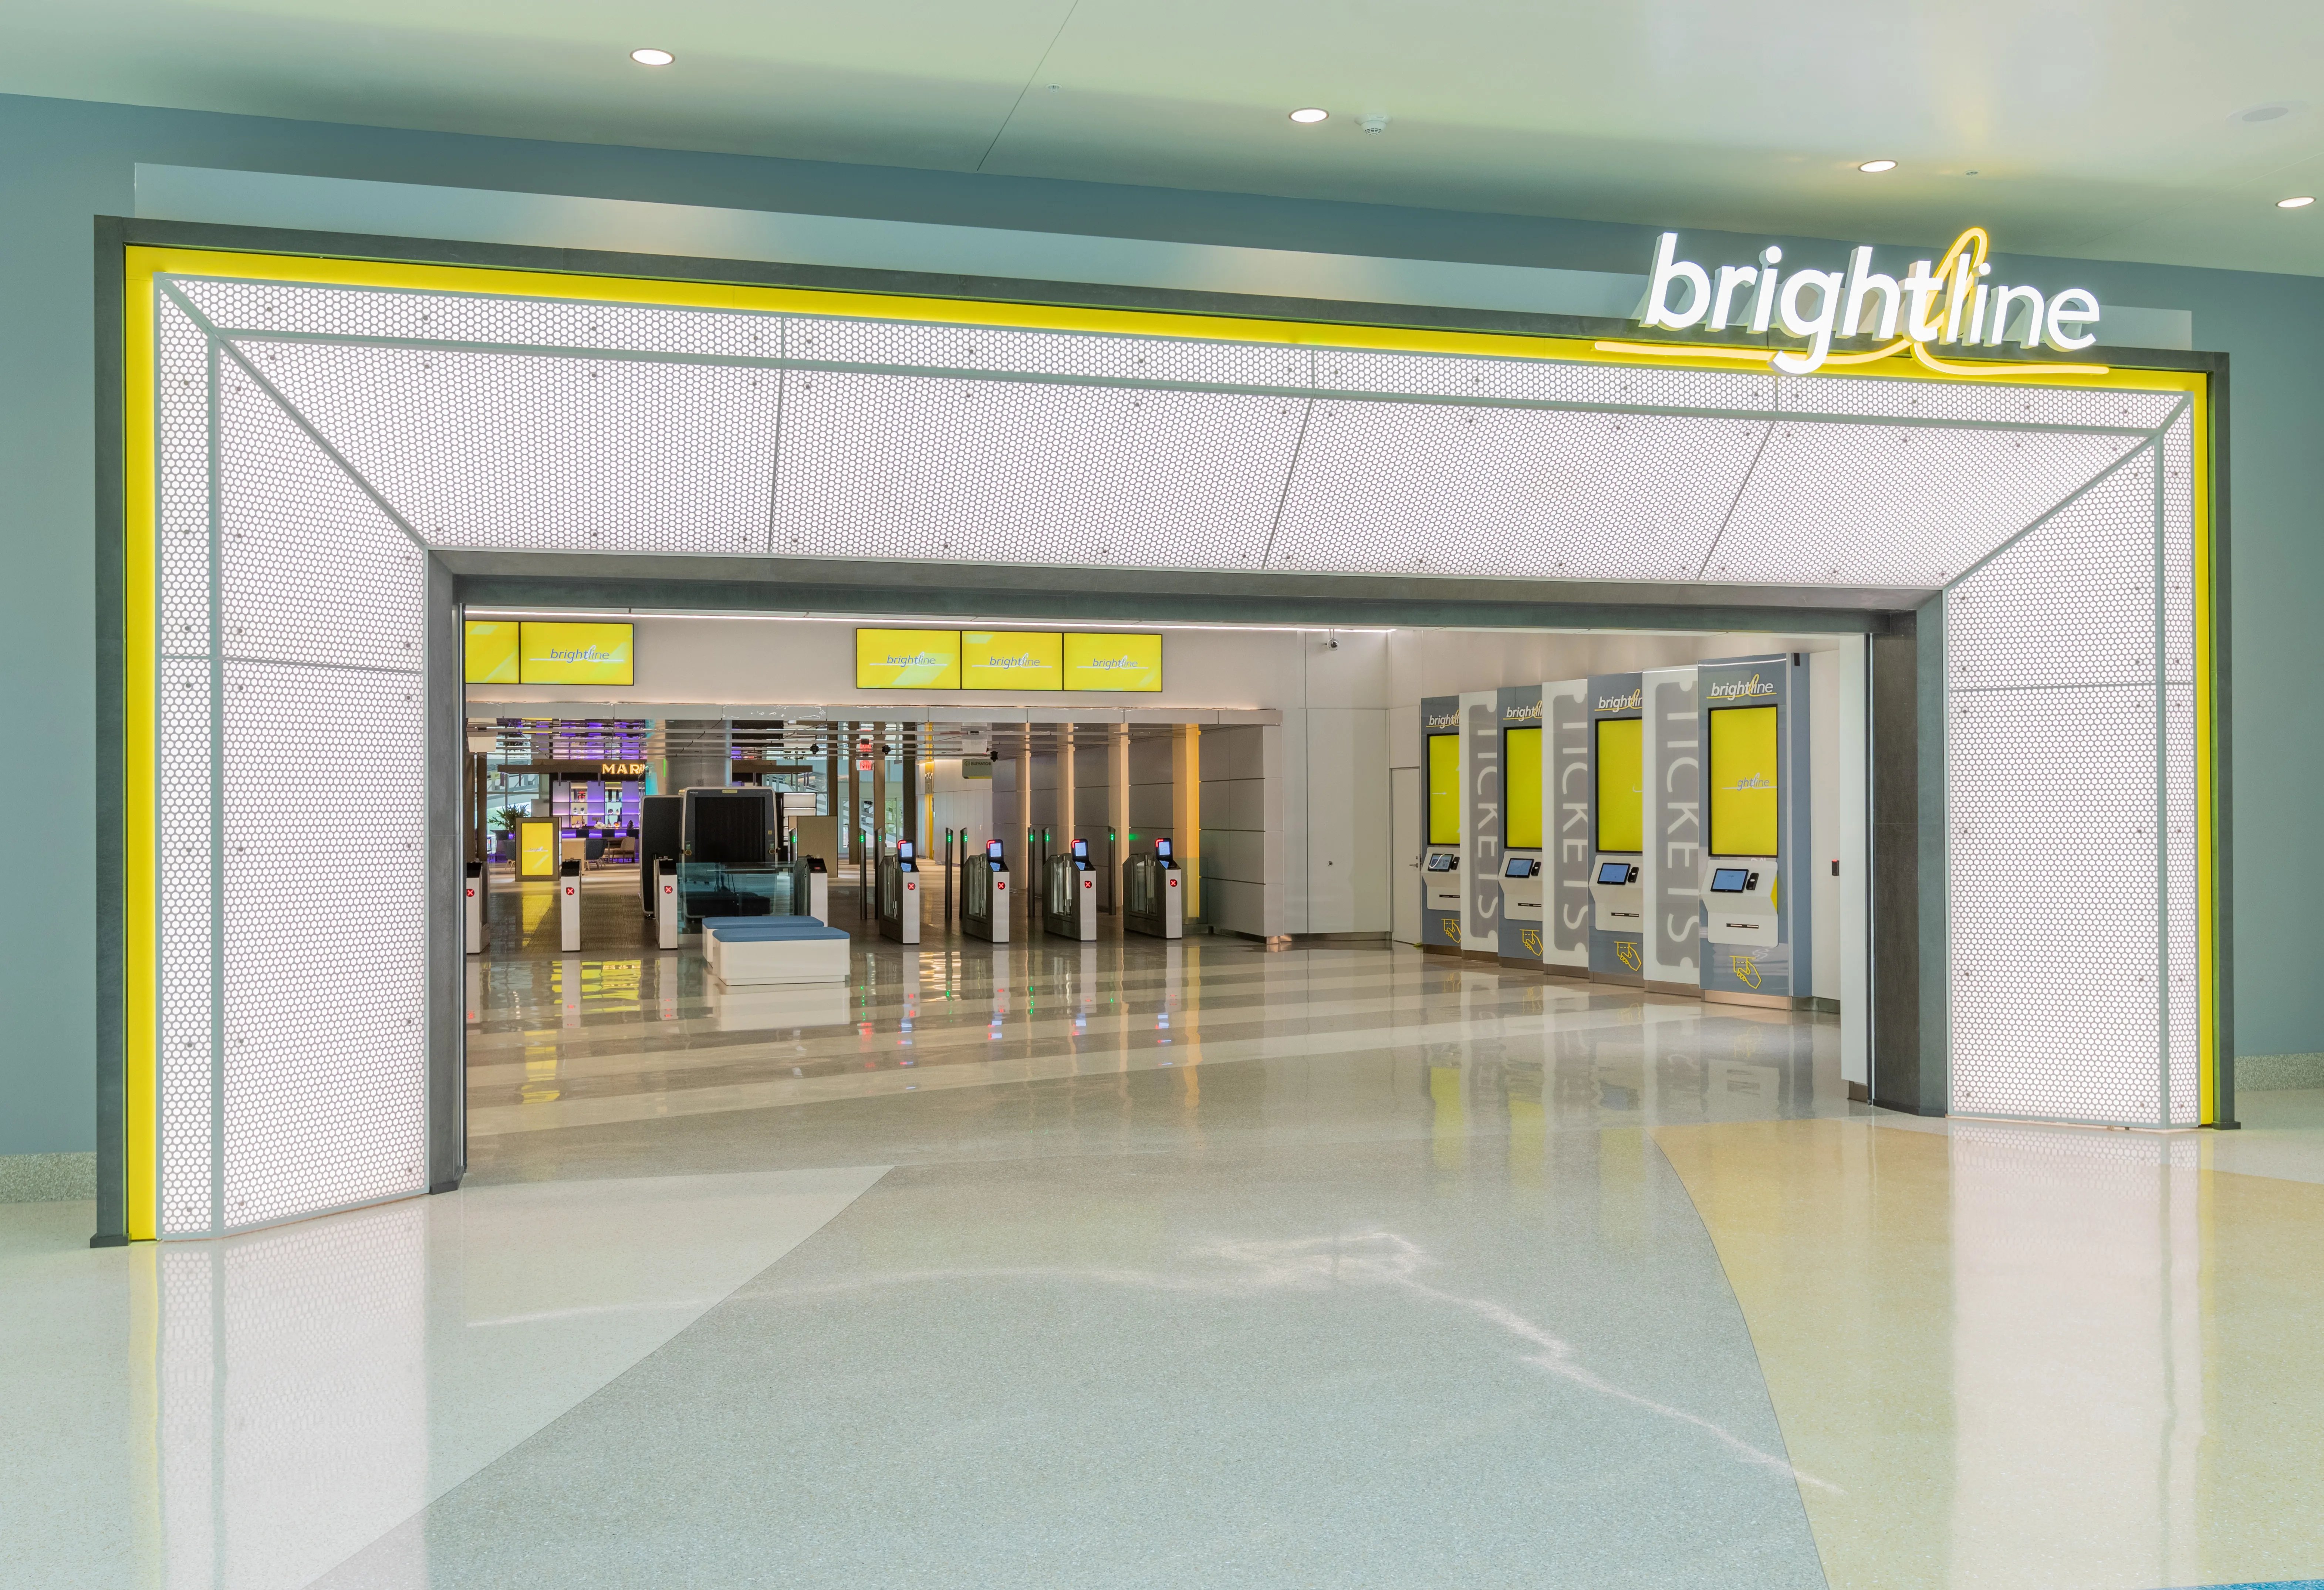 How does the Brightline station look inside?